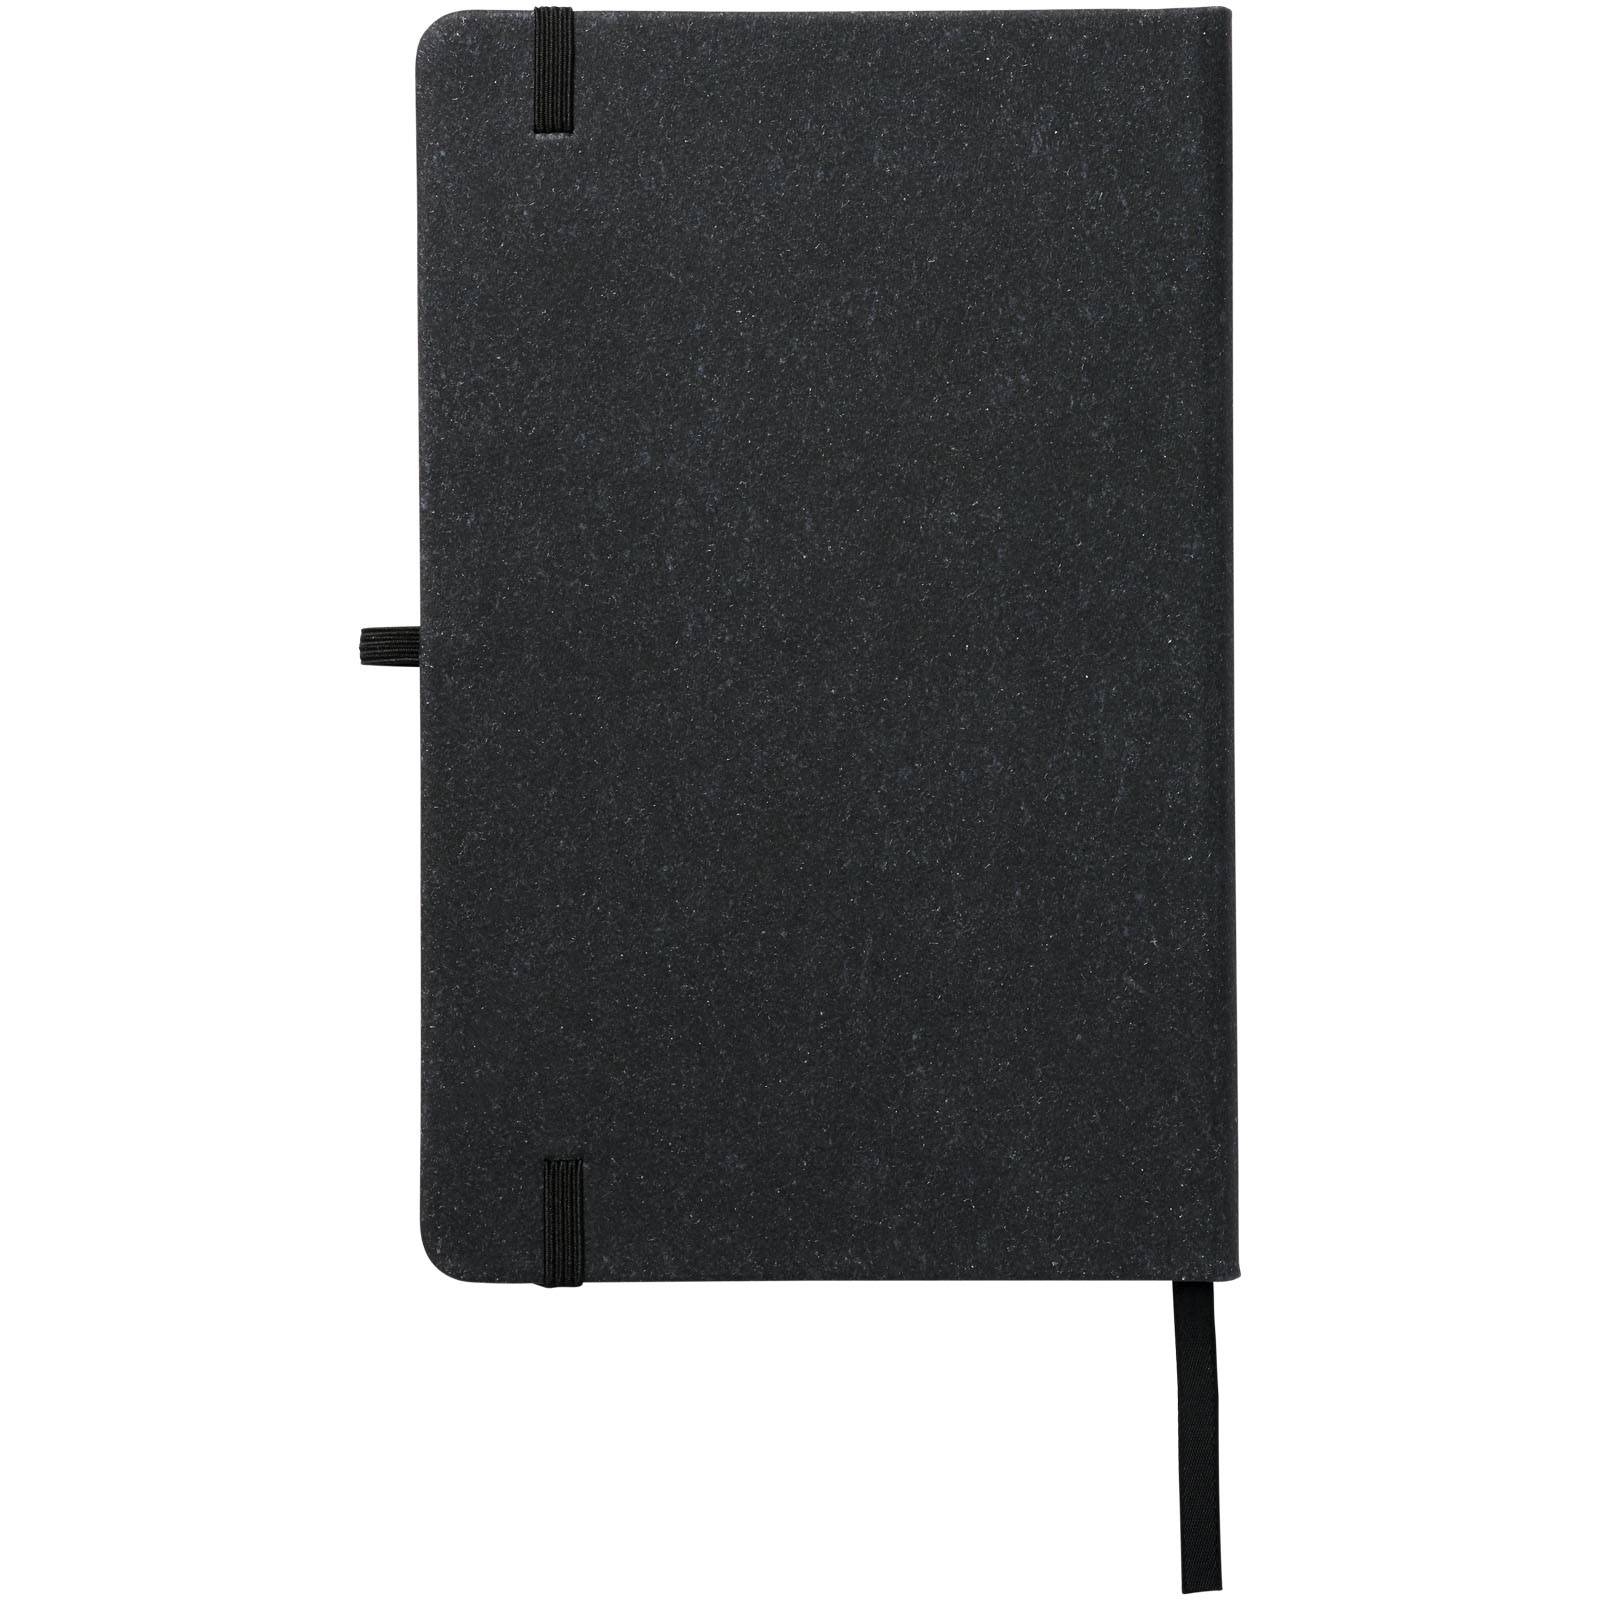 Advertising Hard cover notebooks - Atlana leather pieces notebook - 2